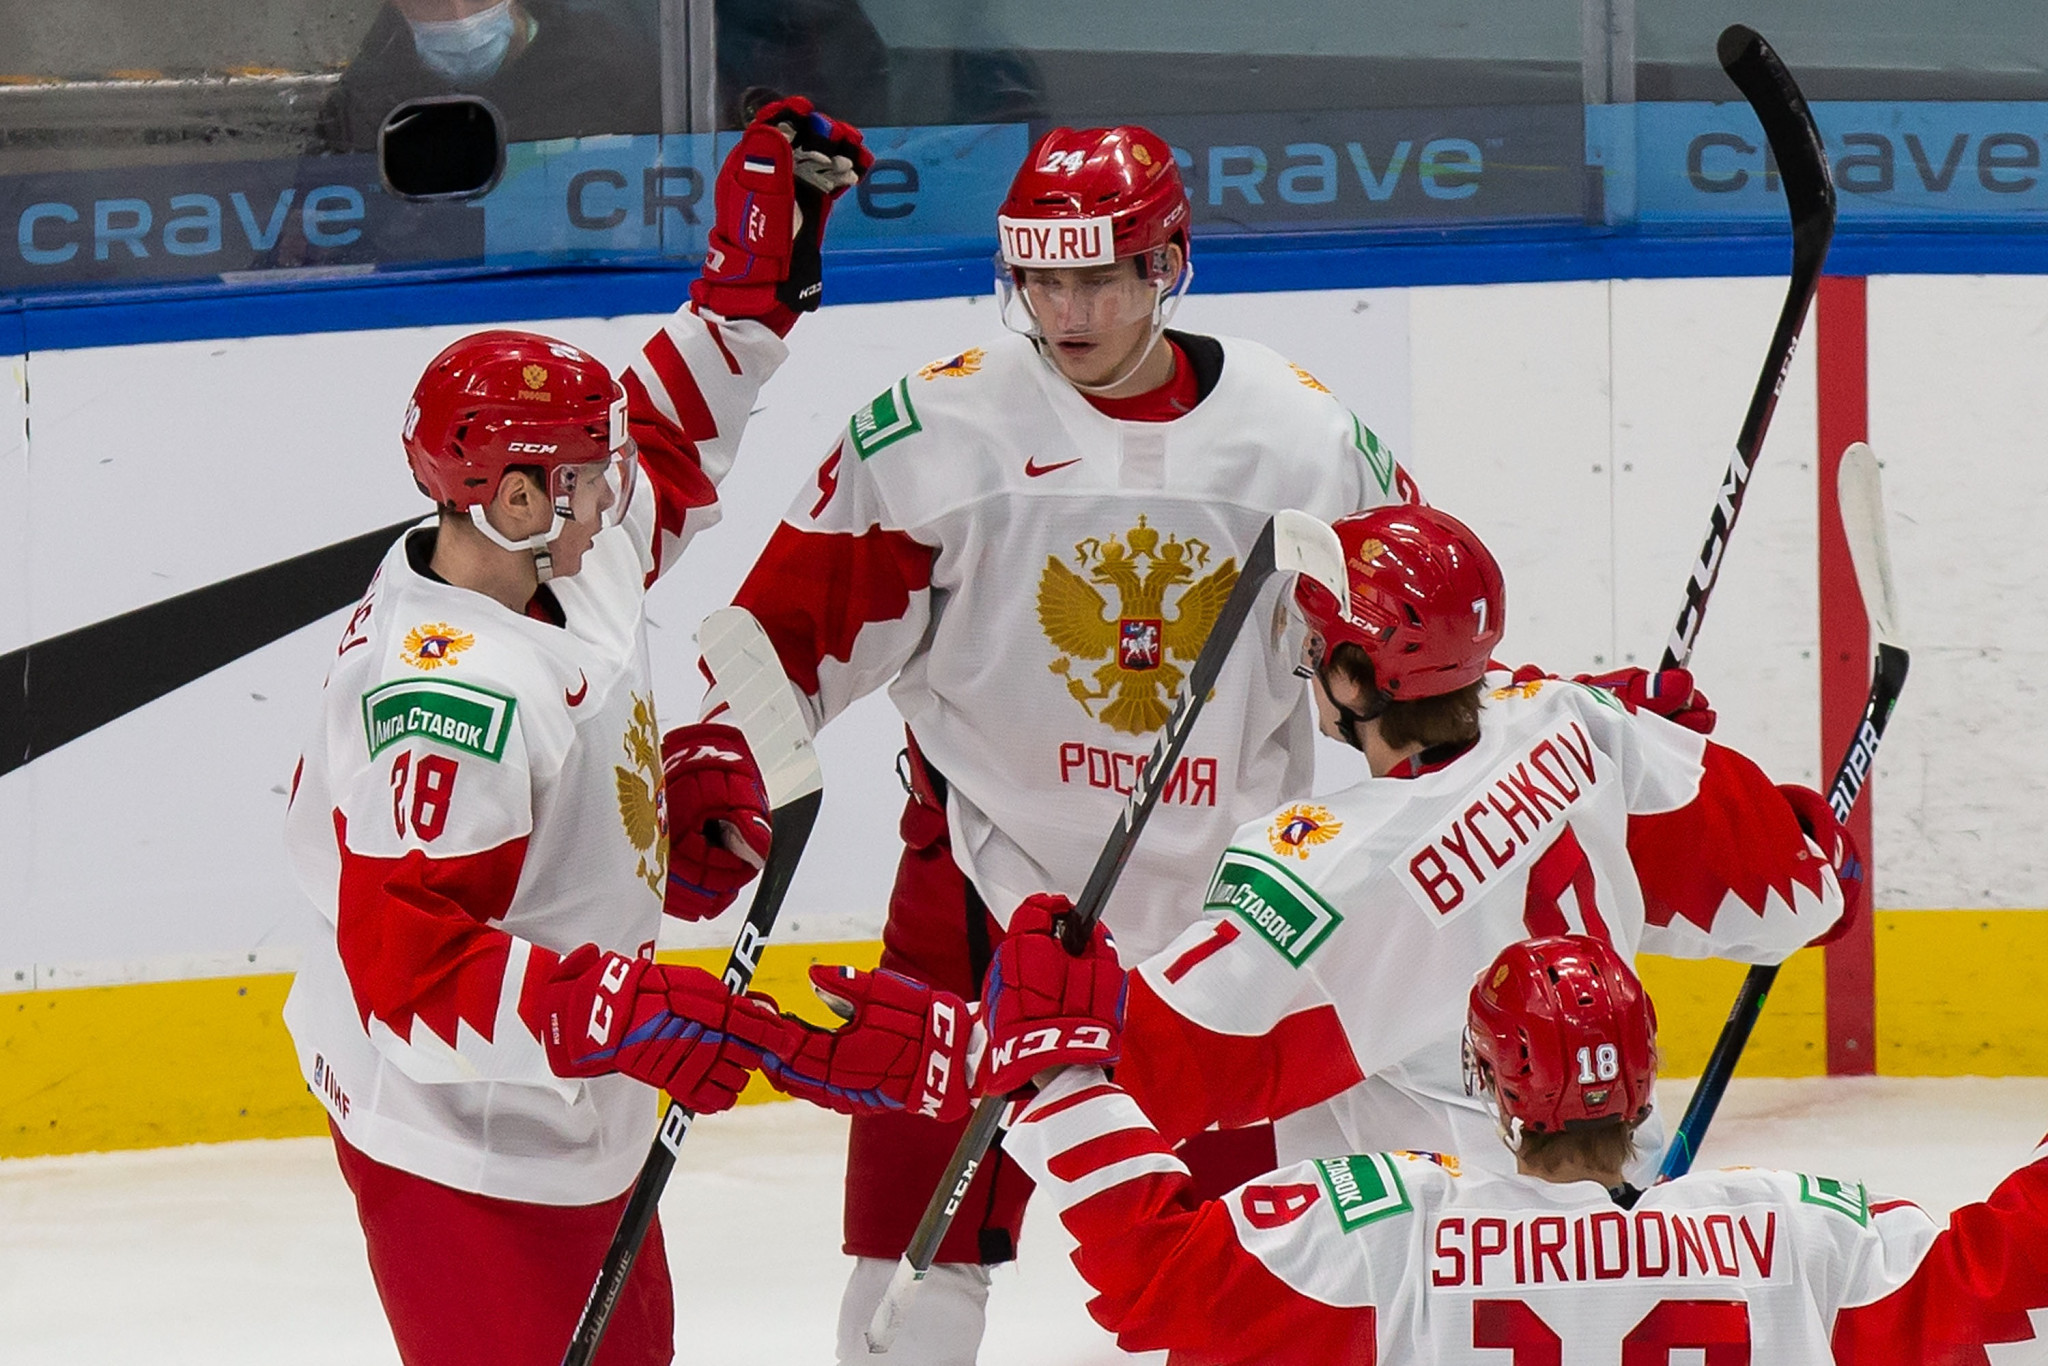 Russia, who finished fourth at the 2021 World Junior Championship, will not compete at this year's decision of the tournament after being banned by the IIHF over the country's invasion of Ukraine ©Getty Images